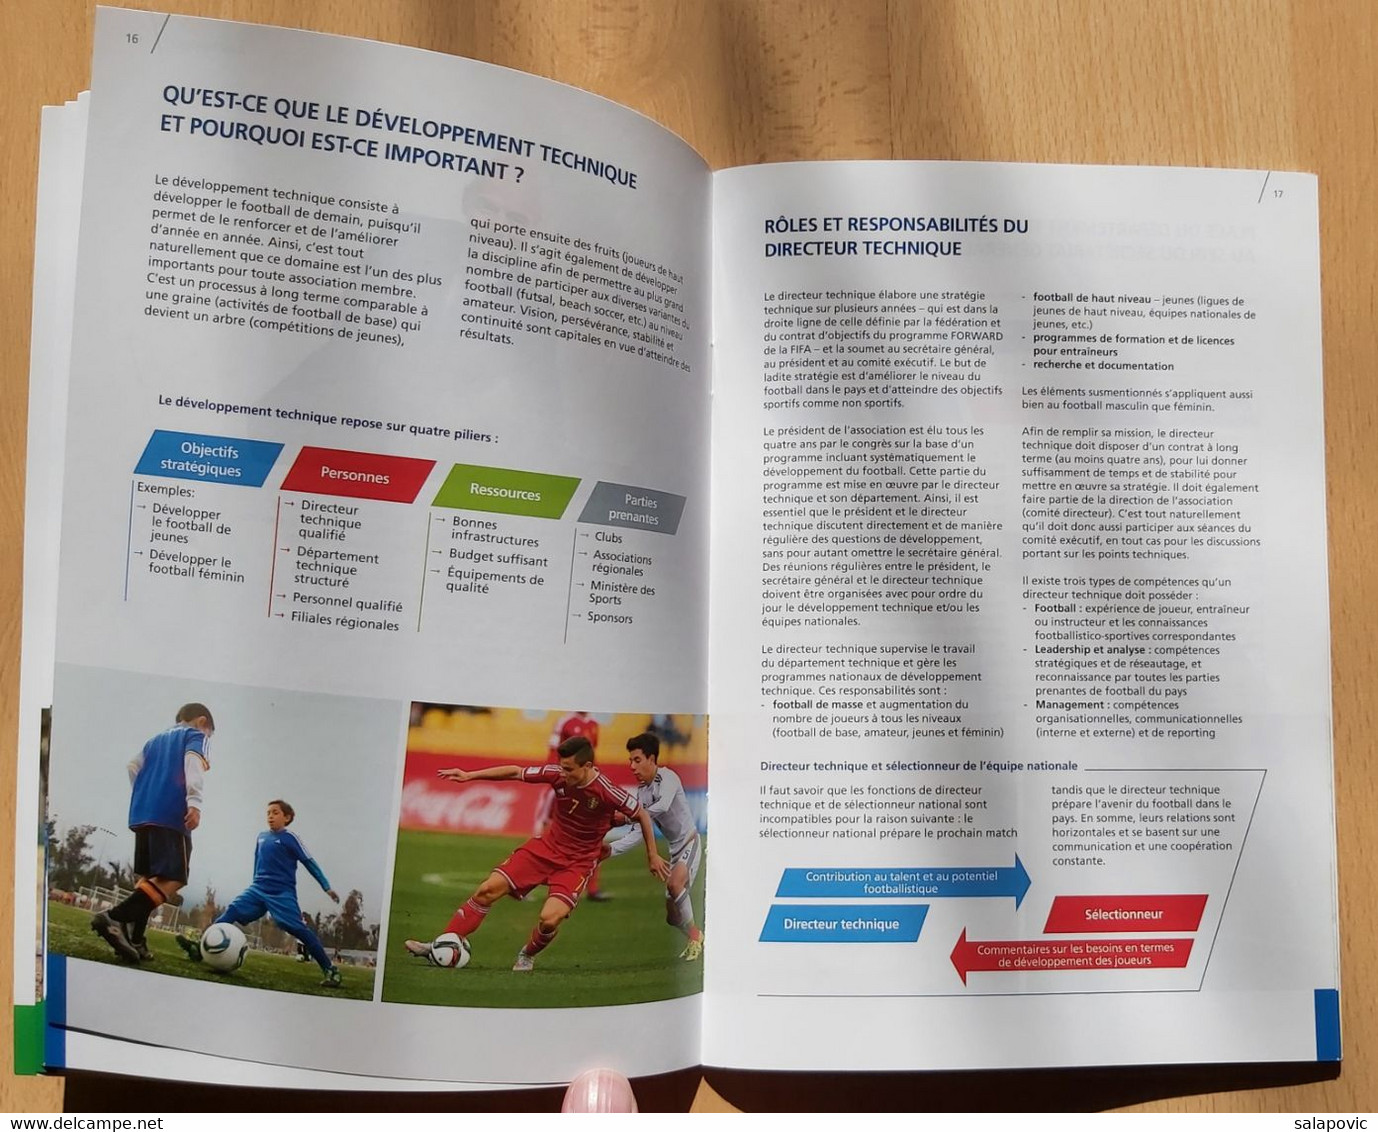 FIFA TECHNICAL DIRECTOR ROLES AND RESPONSIBILITIES, Football - Libros